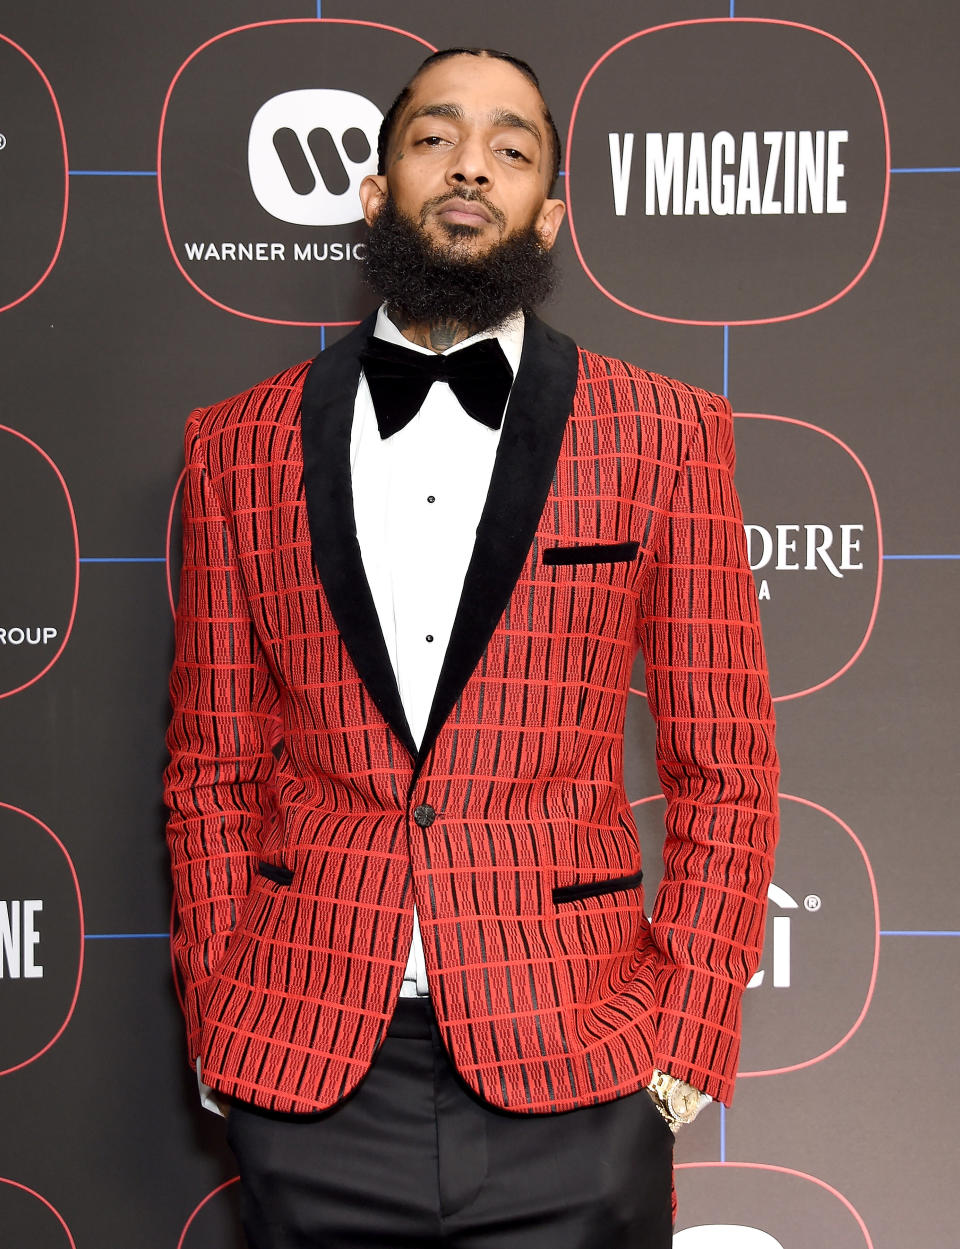 <span class="s1">Nipsey Hussle arrives at the Warner Music Group Pre-Grammy Celebration on Feb. 7 in Los Angeles. (Photo: Gregg DeGuire/Getty Images)</span>